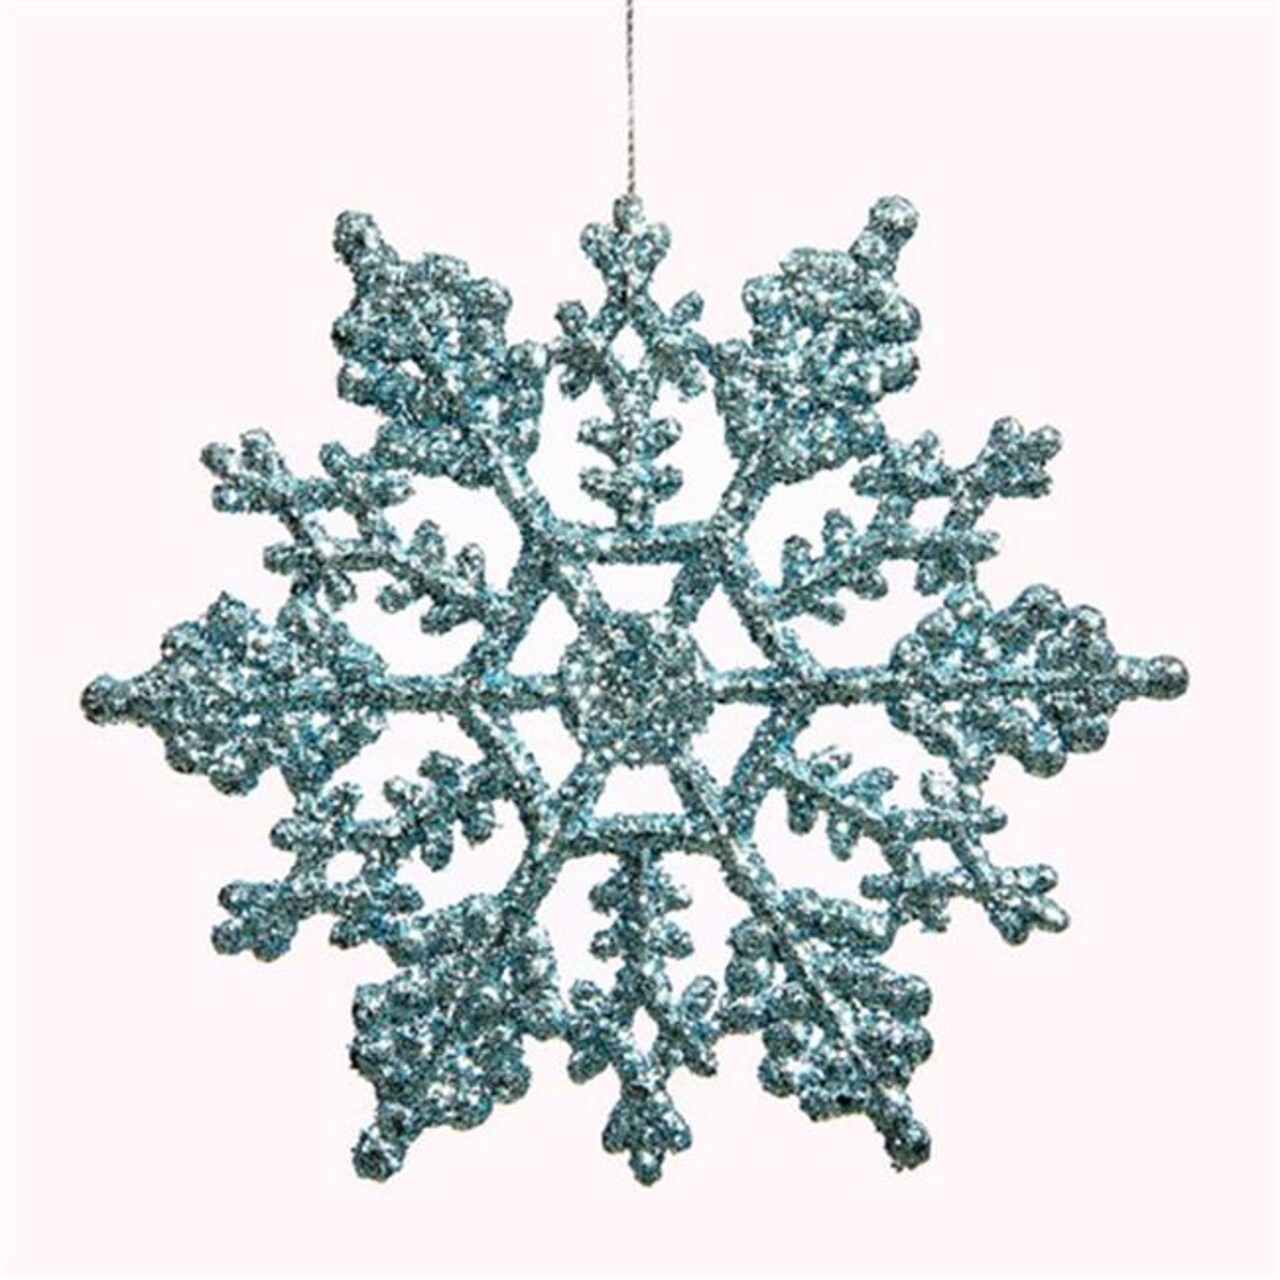 NorthLight Baby Blue Glitter Snowflake Christmas Ornaments- 4 in. - Pack of 24